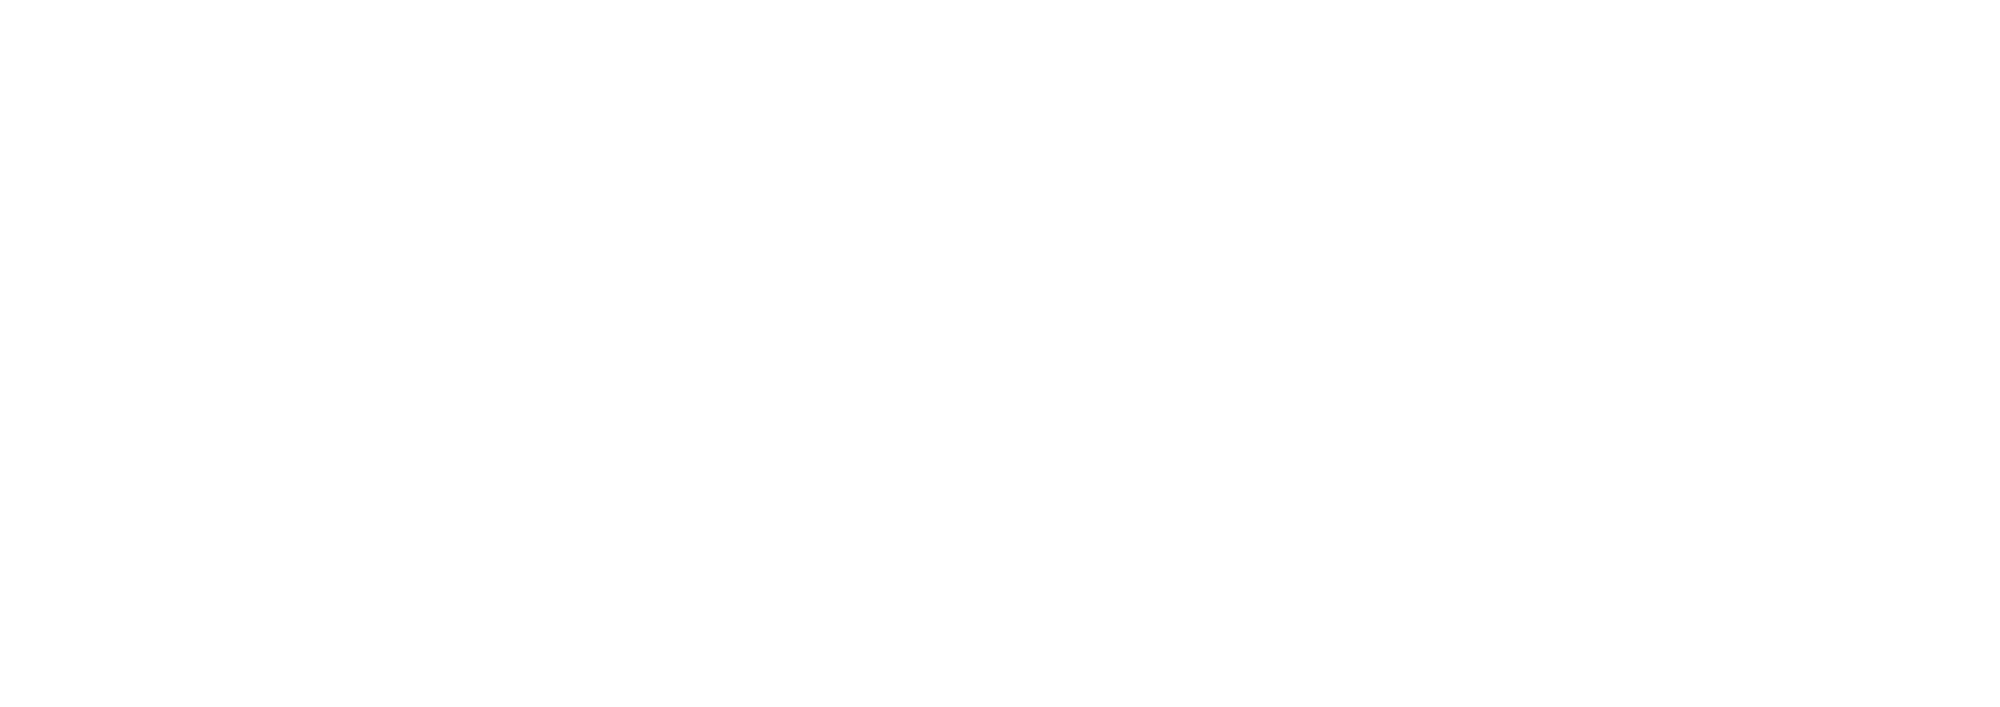 earned-wage-access-business-solutions-icon-pattern